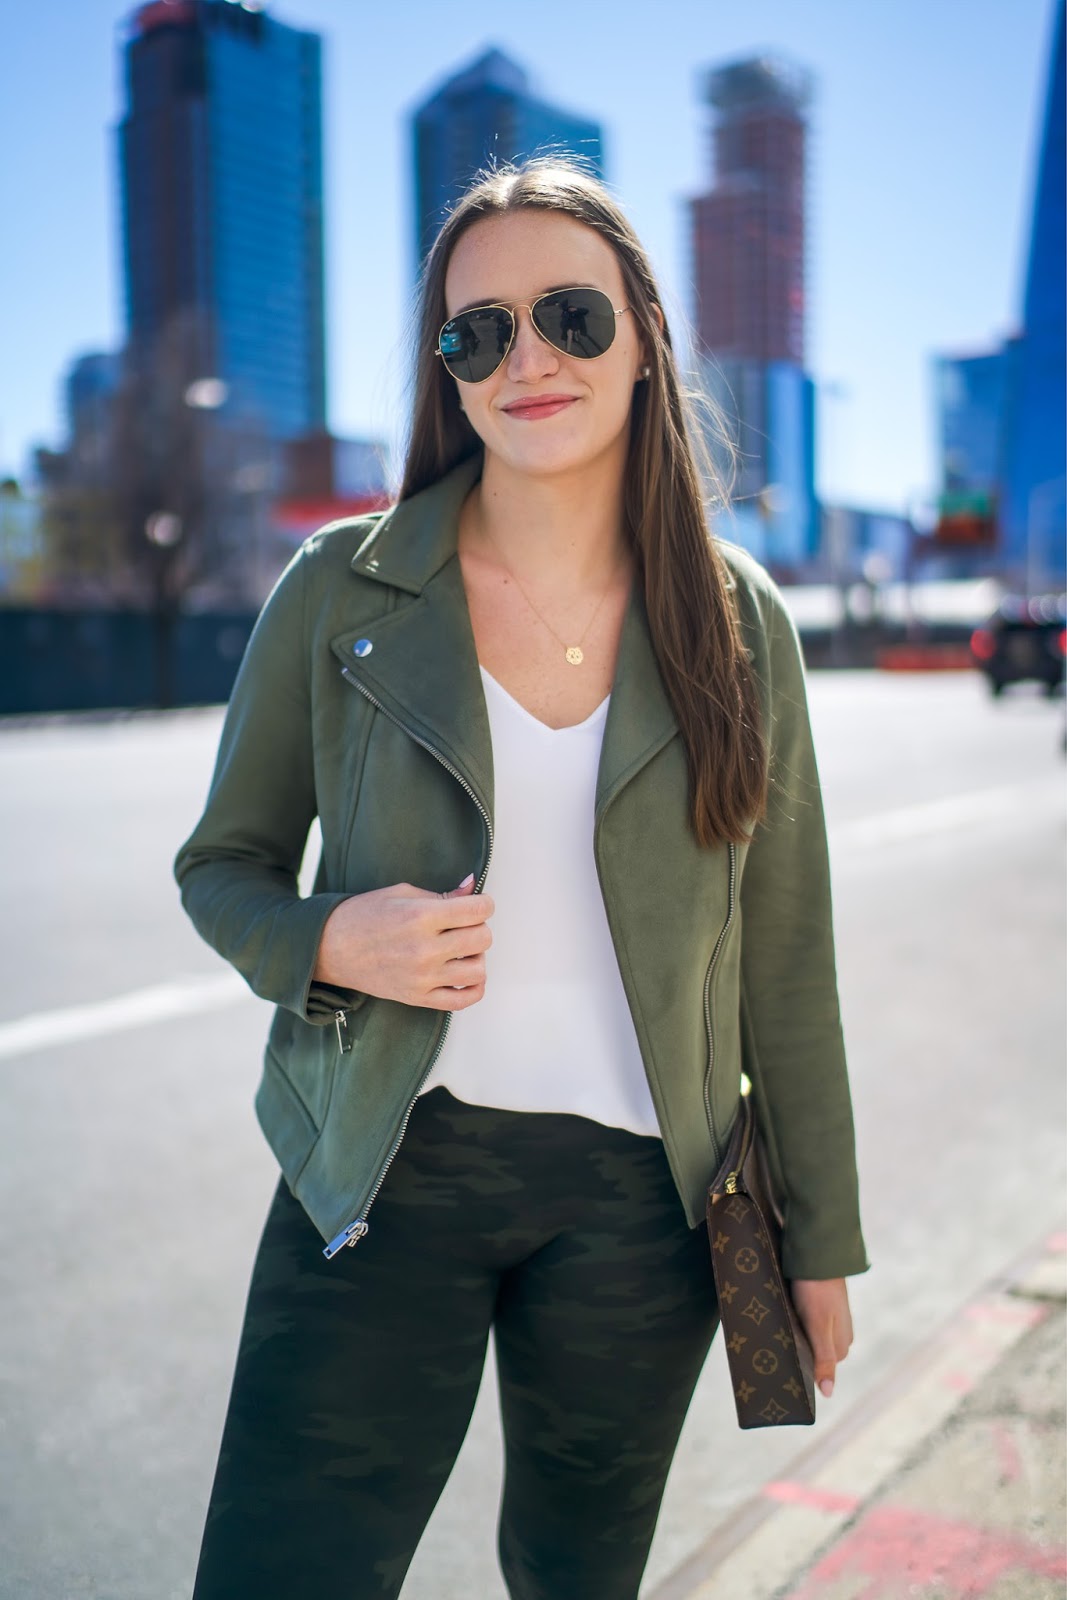 Four Spring Fashion Items I Can't Stop Wearing by popular New York fashion blogger Covering the Bases